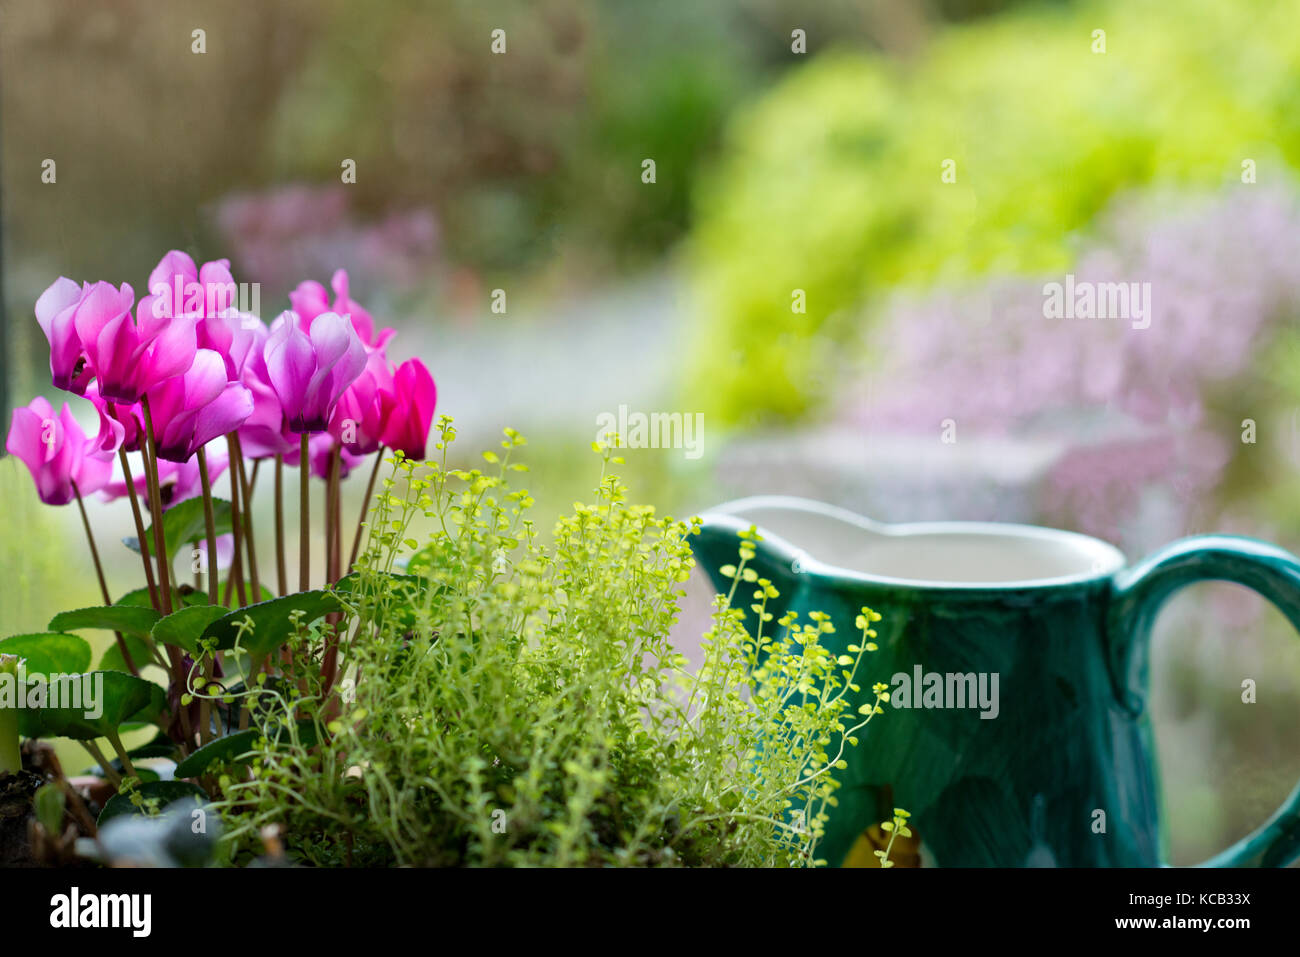 A still life group of cyclamen beside a green  jug with out of focus garden in the background. Country life style Copy space. Stock Photo